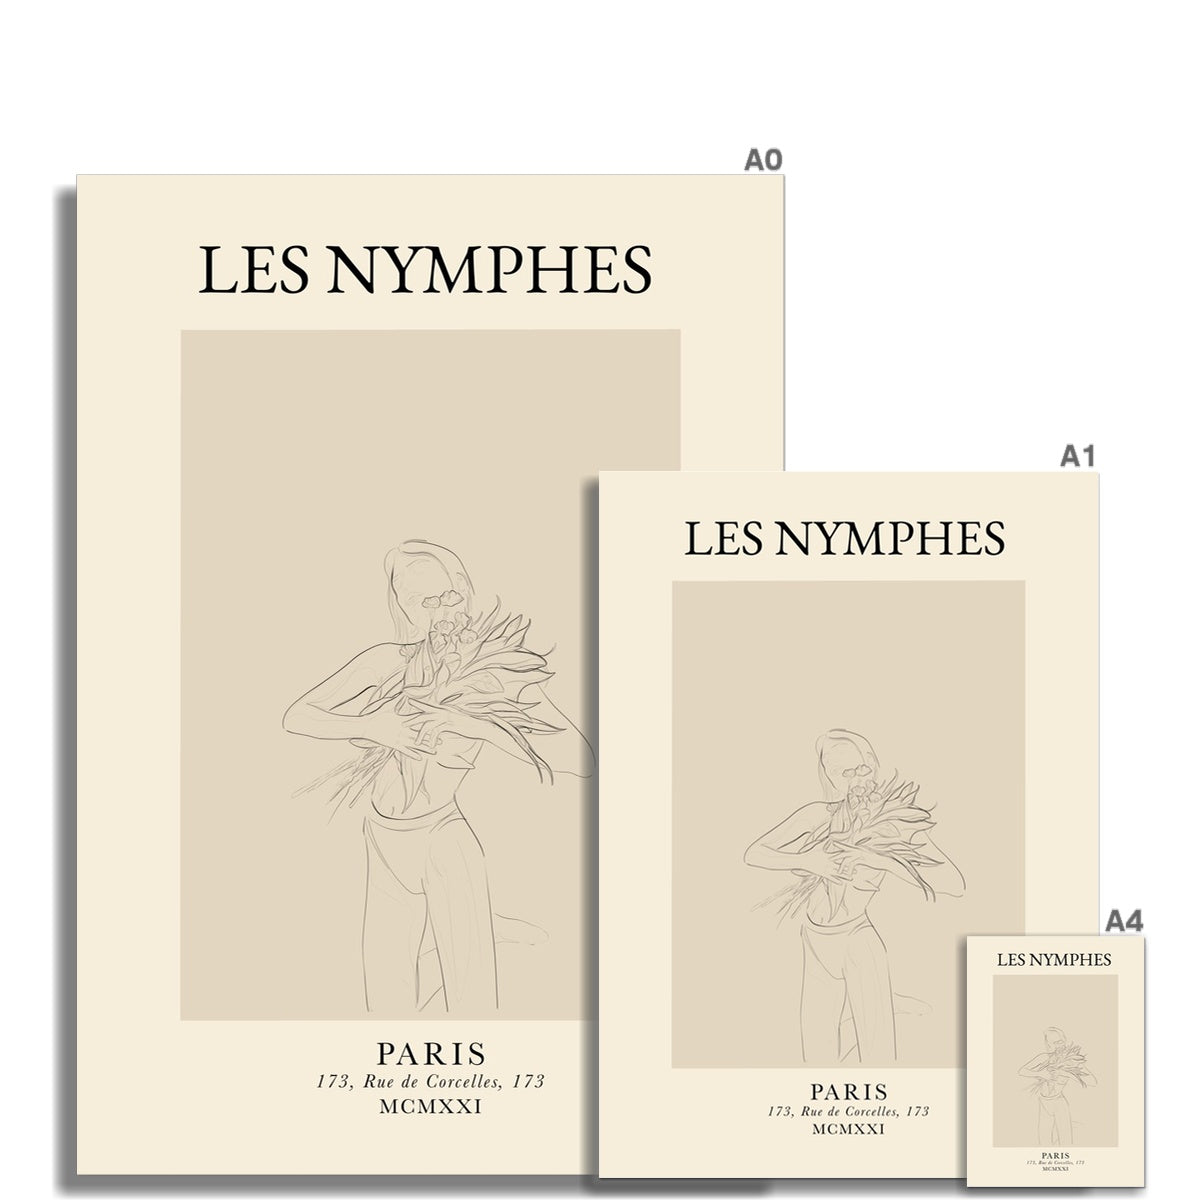 © les muses / Les Nymphes is a dreamy wall art collection featuring line art drawings of the female figure. The minimalist feminine art prints add a vintage Parisian touch to any wall gallery.